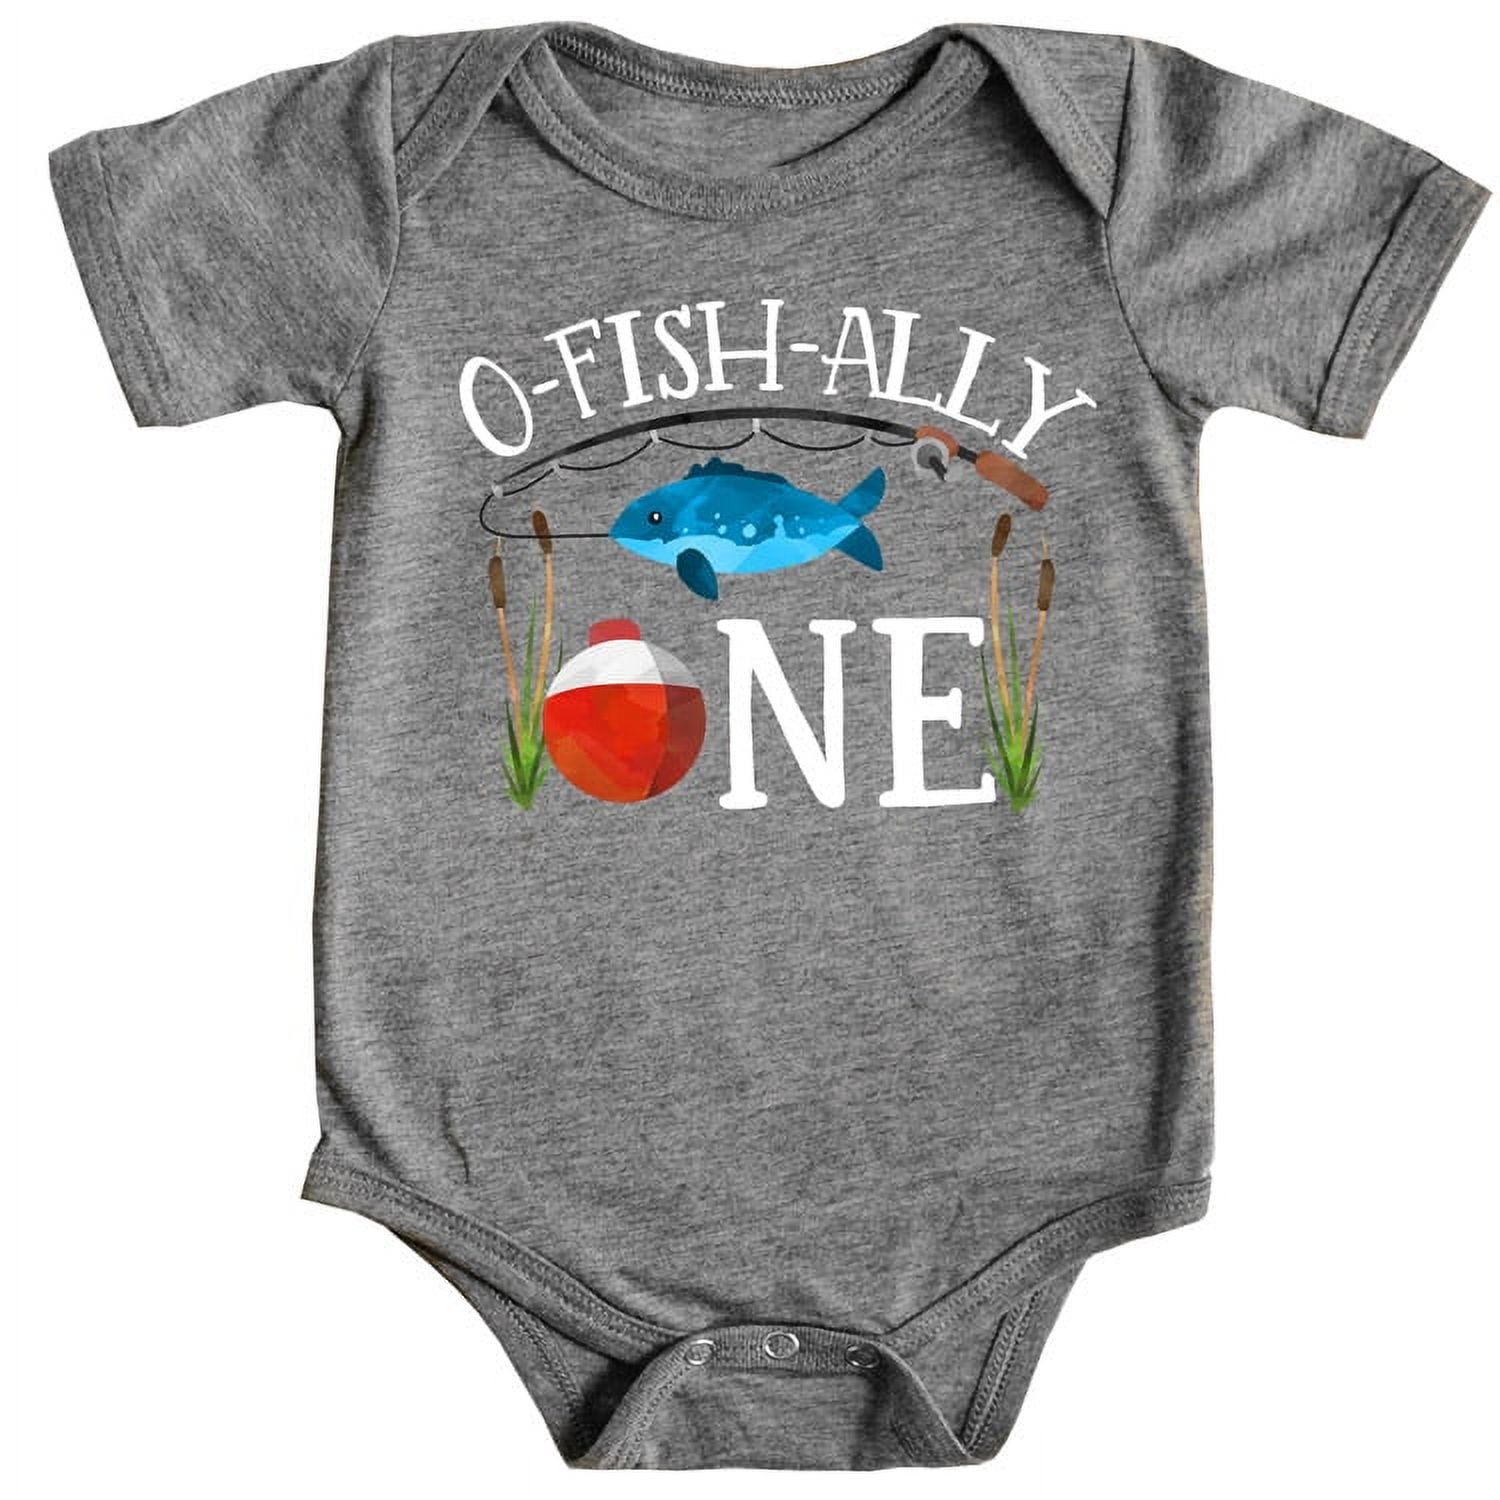 O-Fish-Ally One Boys 1st Birthday Bodysuit for Baby Boys Fishing First  Birthday Outfit Natural Heather Bodysuit 18 Months 